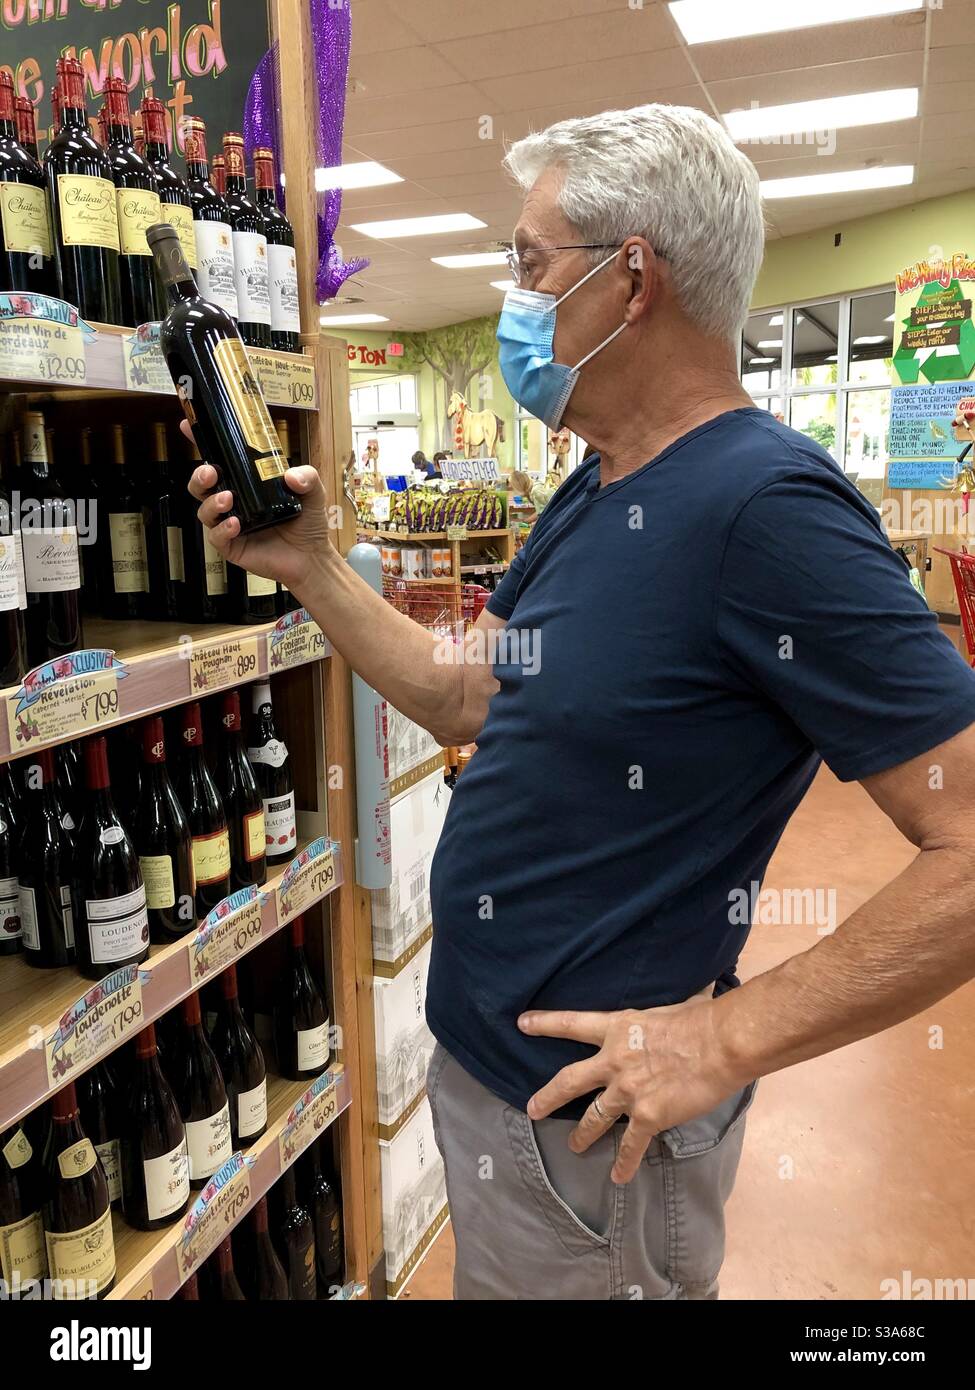 Adult man safely shopping for wine at Trader Joe’s supermarket wearing a non- surgical mask. Stock Photo